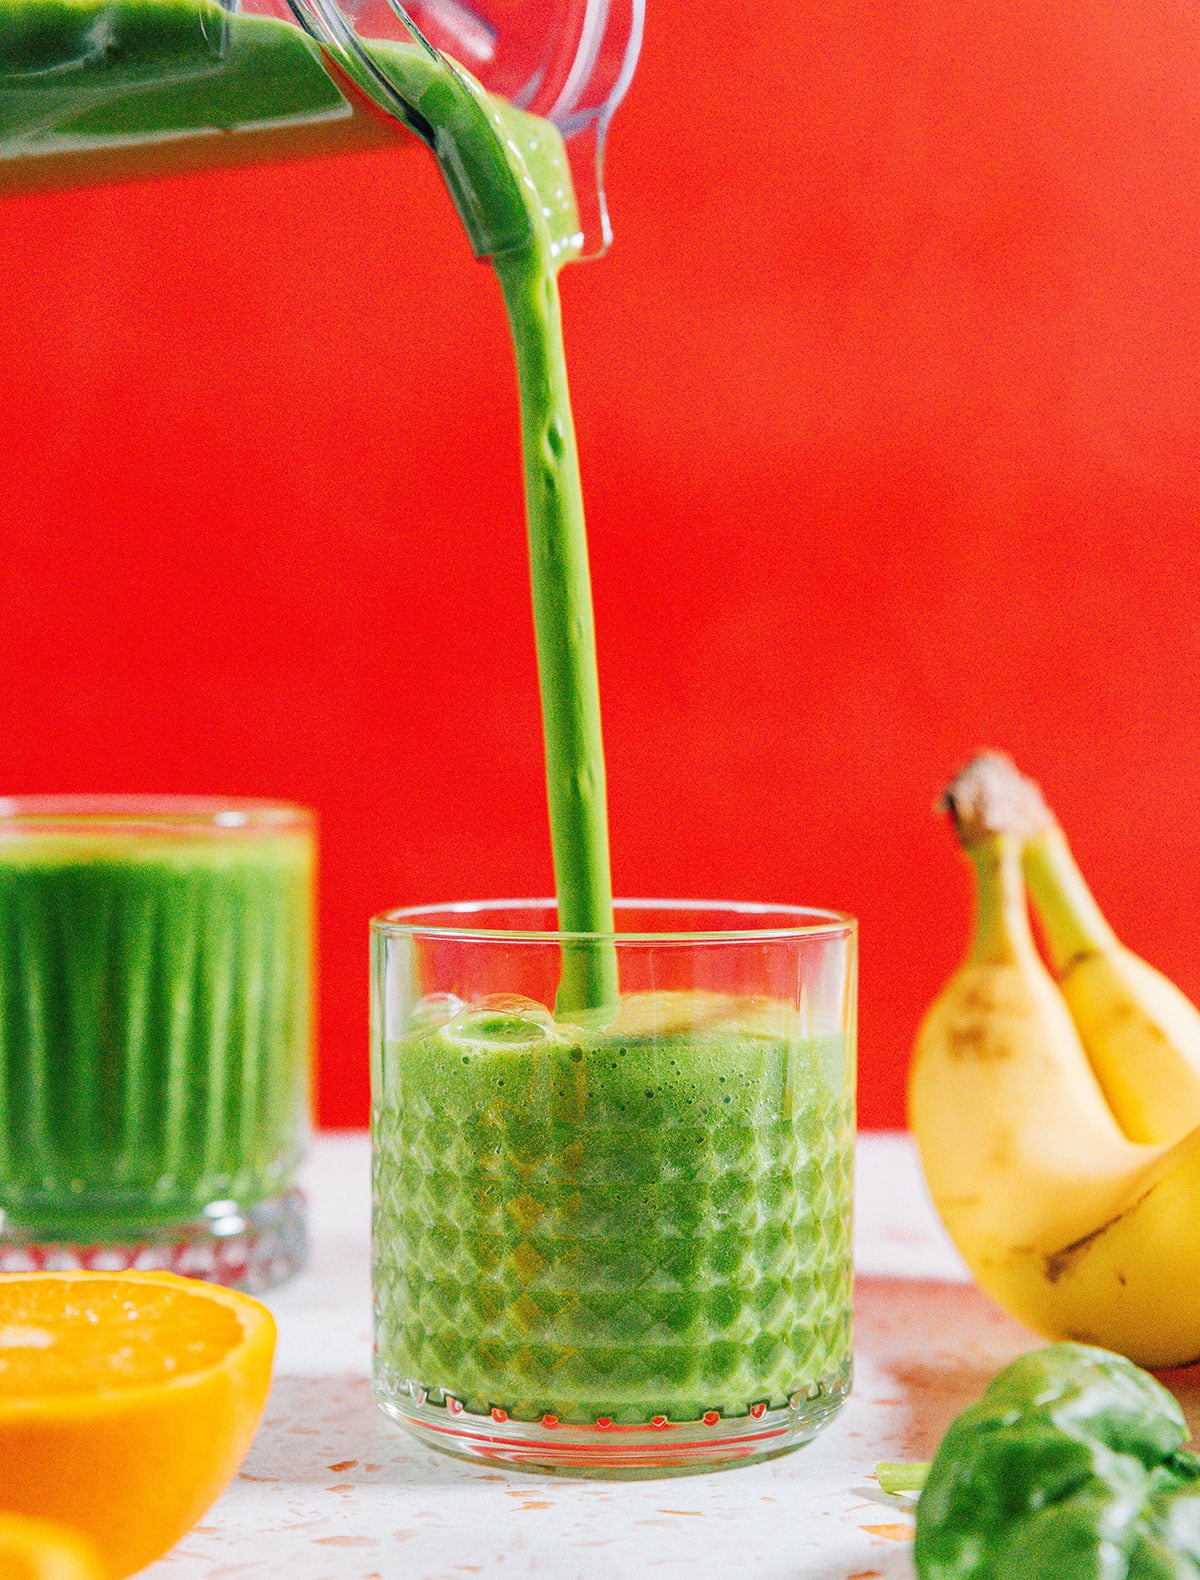 Green smoothie in a glass with red background.